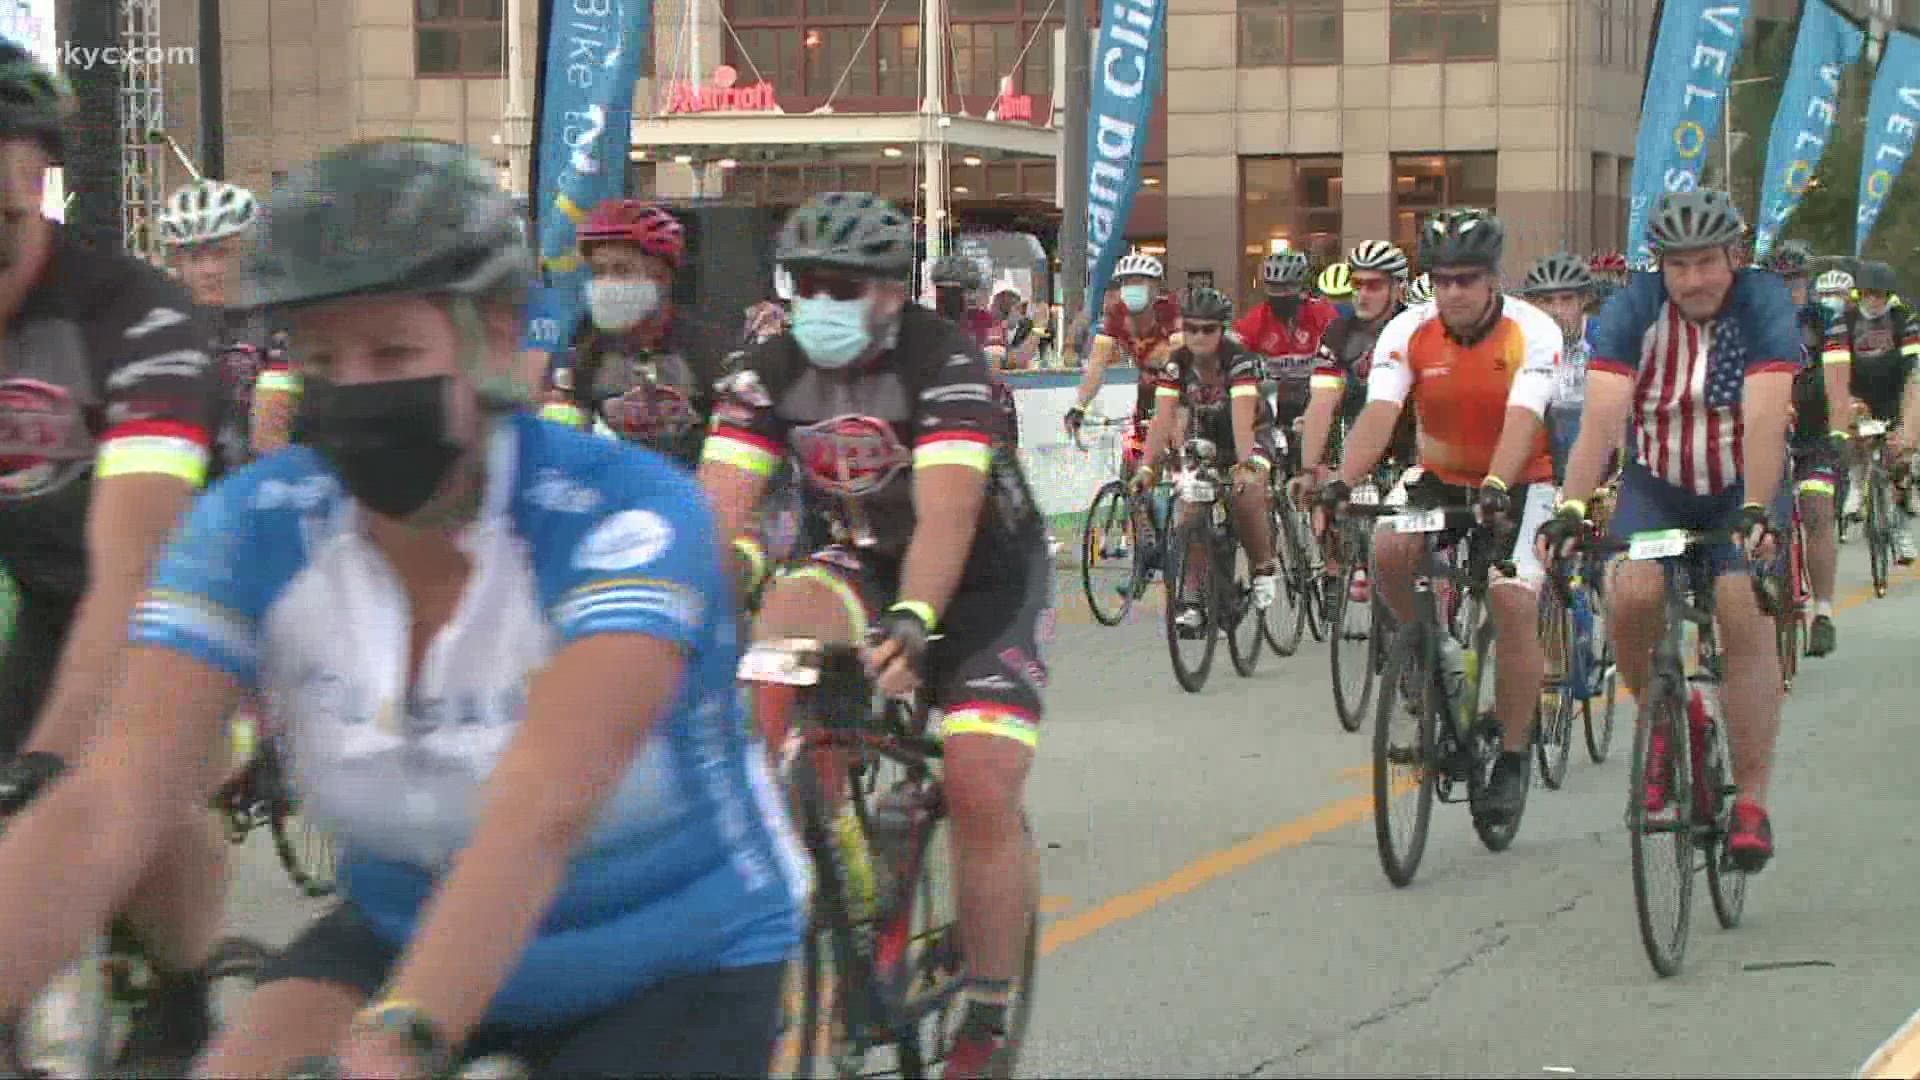 Team WKYC also got in on the action, raising more than $93,000 to help find a cure for cancer.